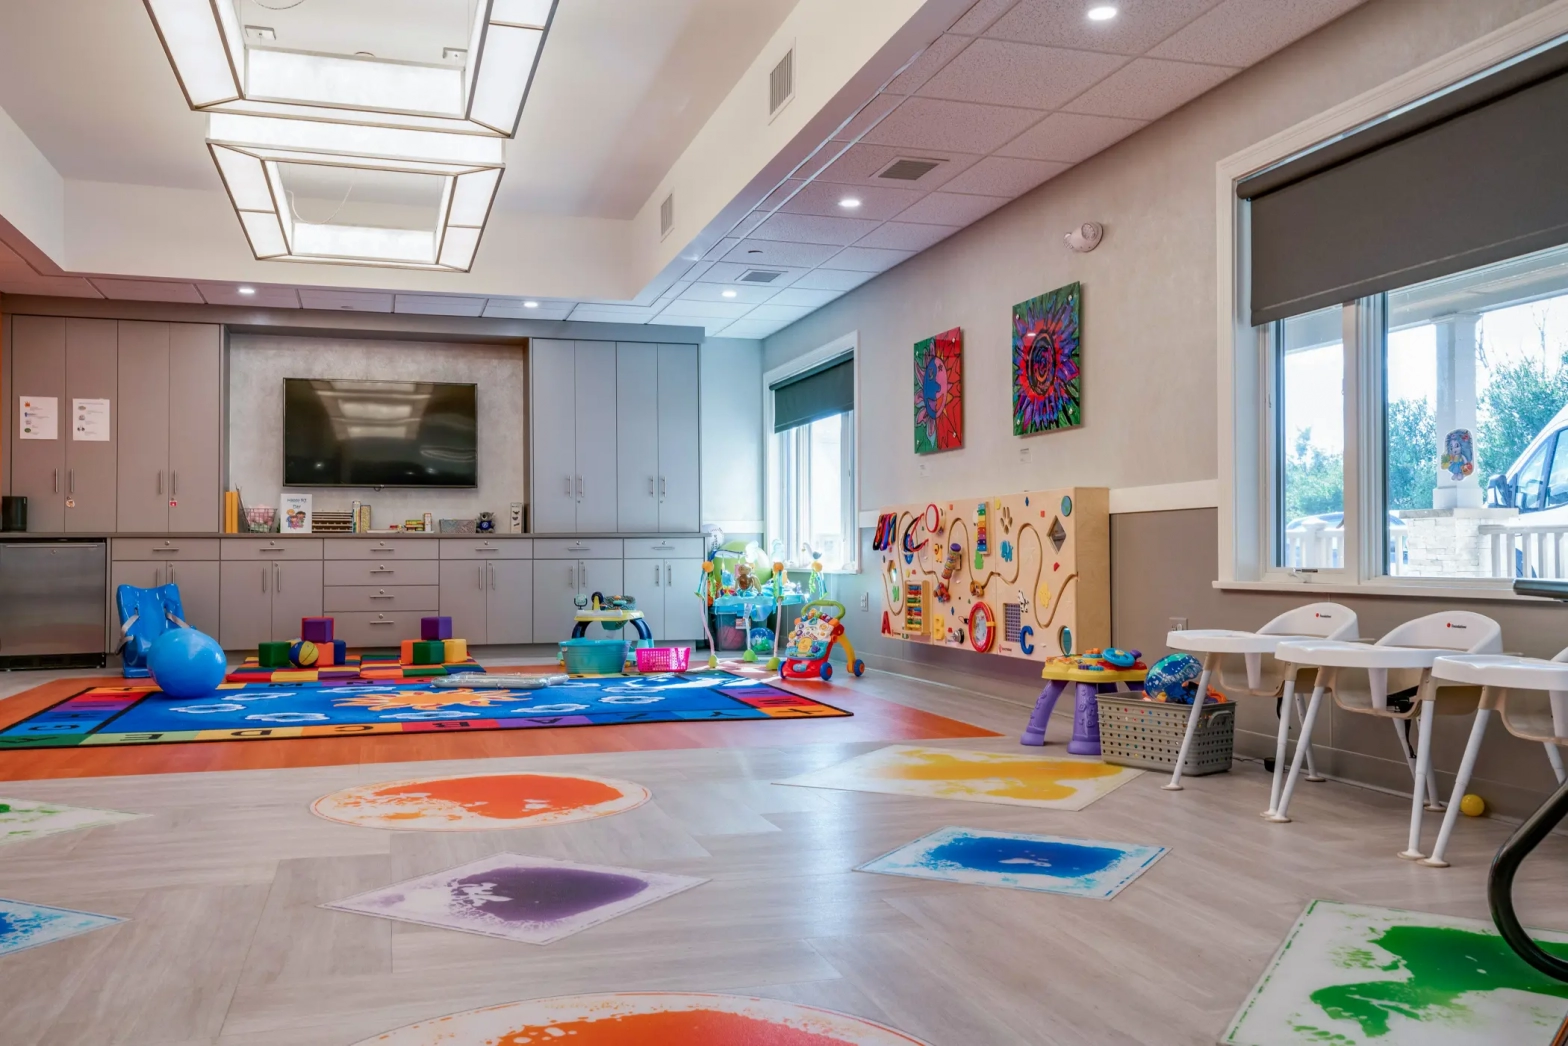 Pediatric Specialty at Danville - Inside The Facility